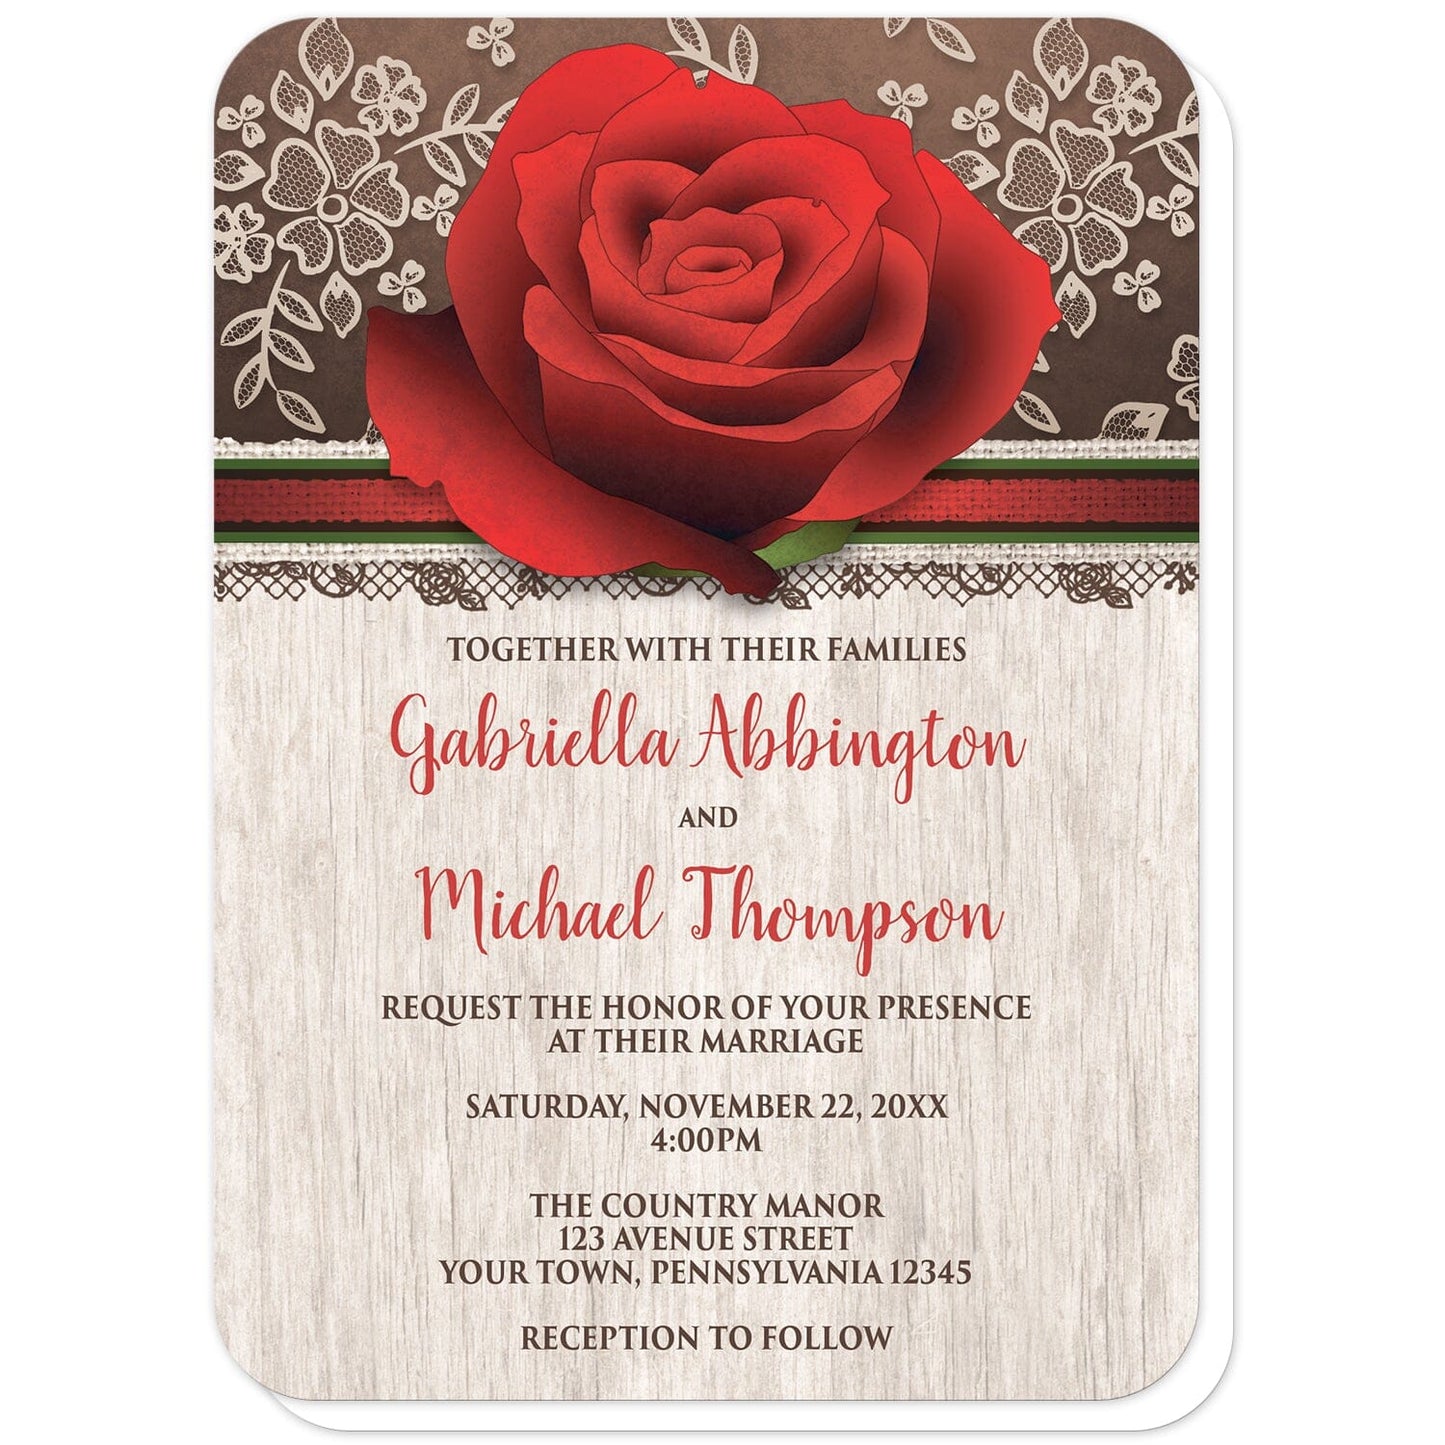 Rustic Wood Lace Red Rose Wedding Invitations (with rounded corners) at Artistically Invited. Beautiful rustic wood lace red rose wedding invitations with a lovely large red rose illustration over a rich brown background with a cream lace design at the top of the invitations. Your personalized marriage celebration details are custom printed in red and brown over a light wood pattern background below the red rose.